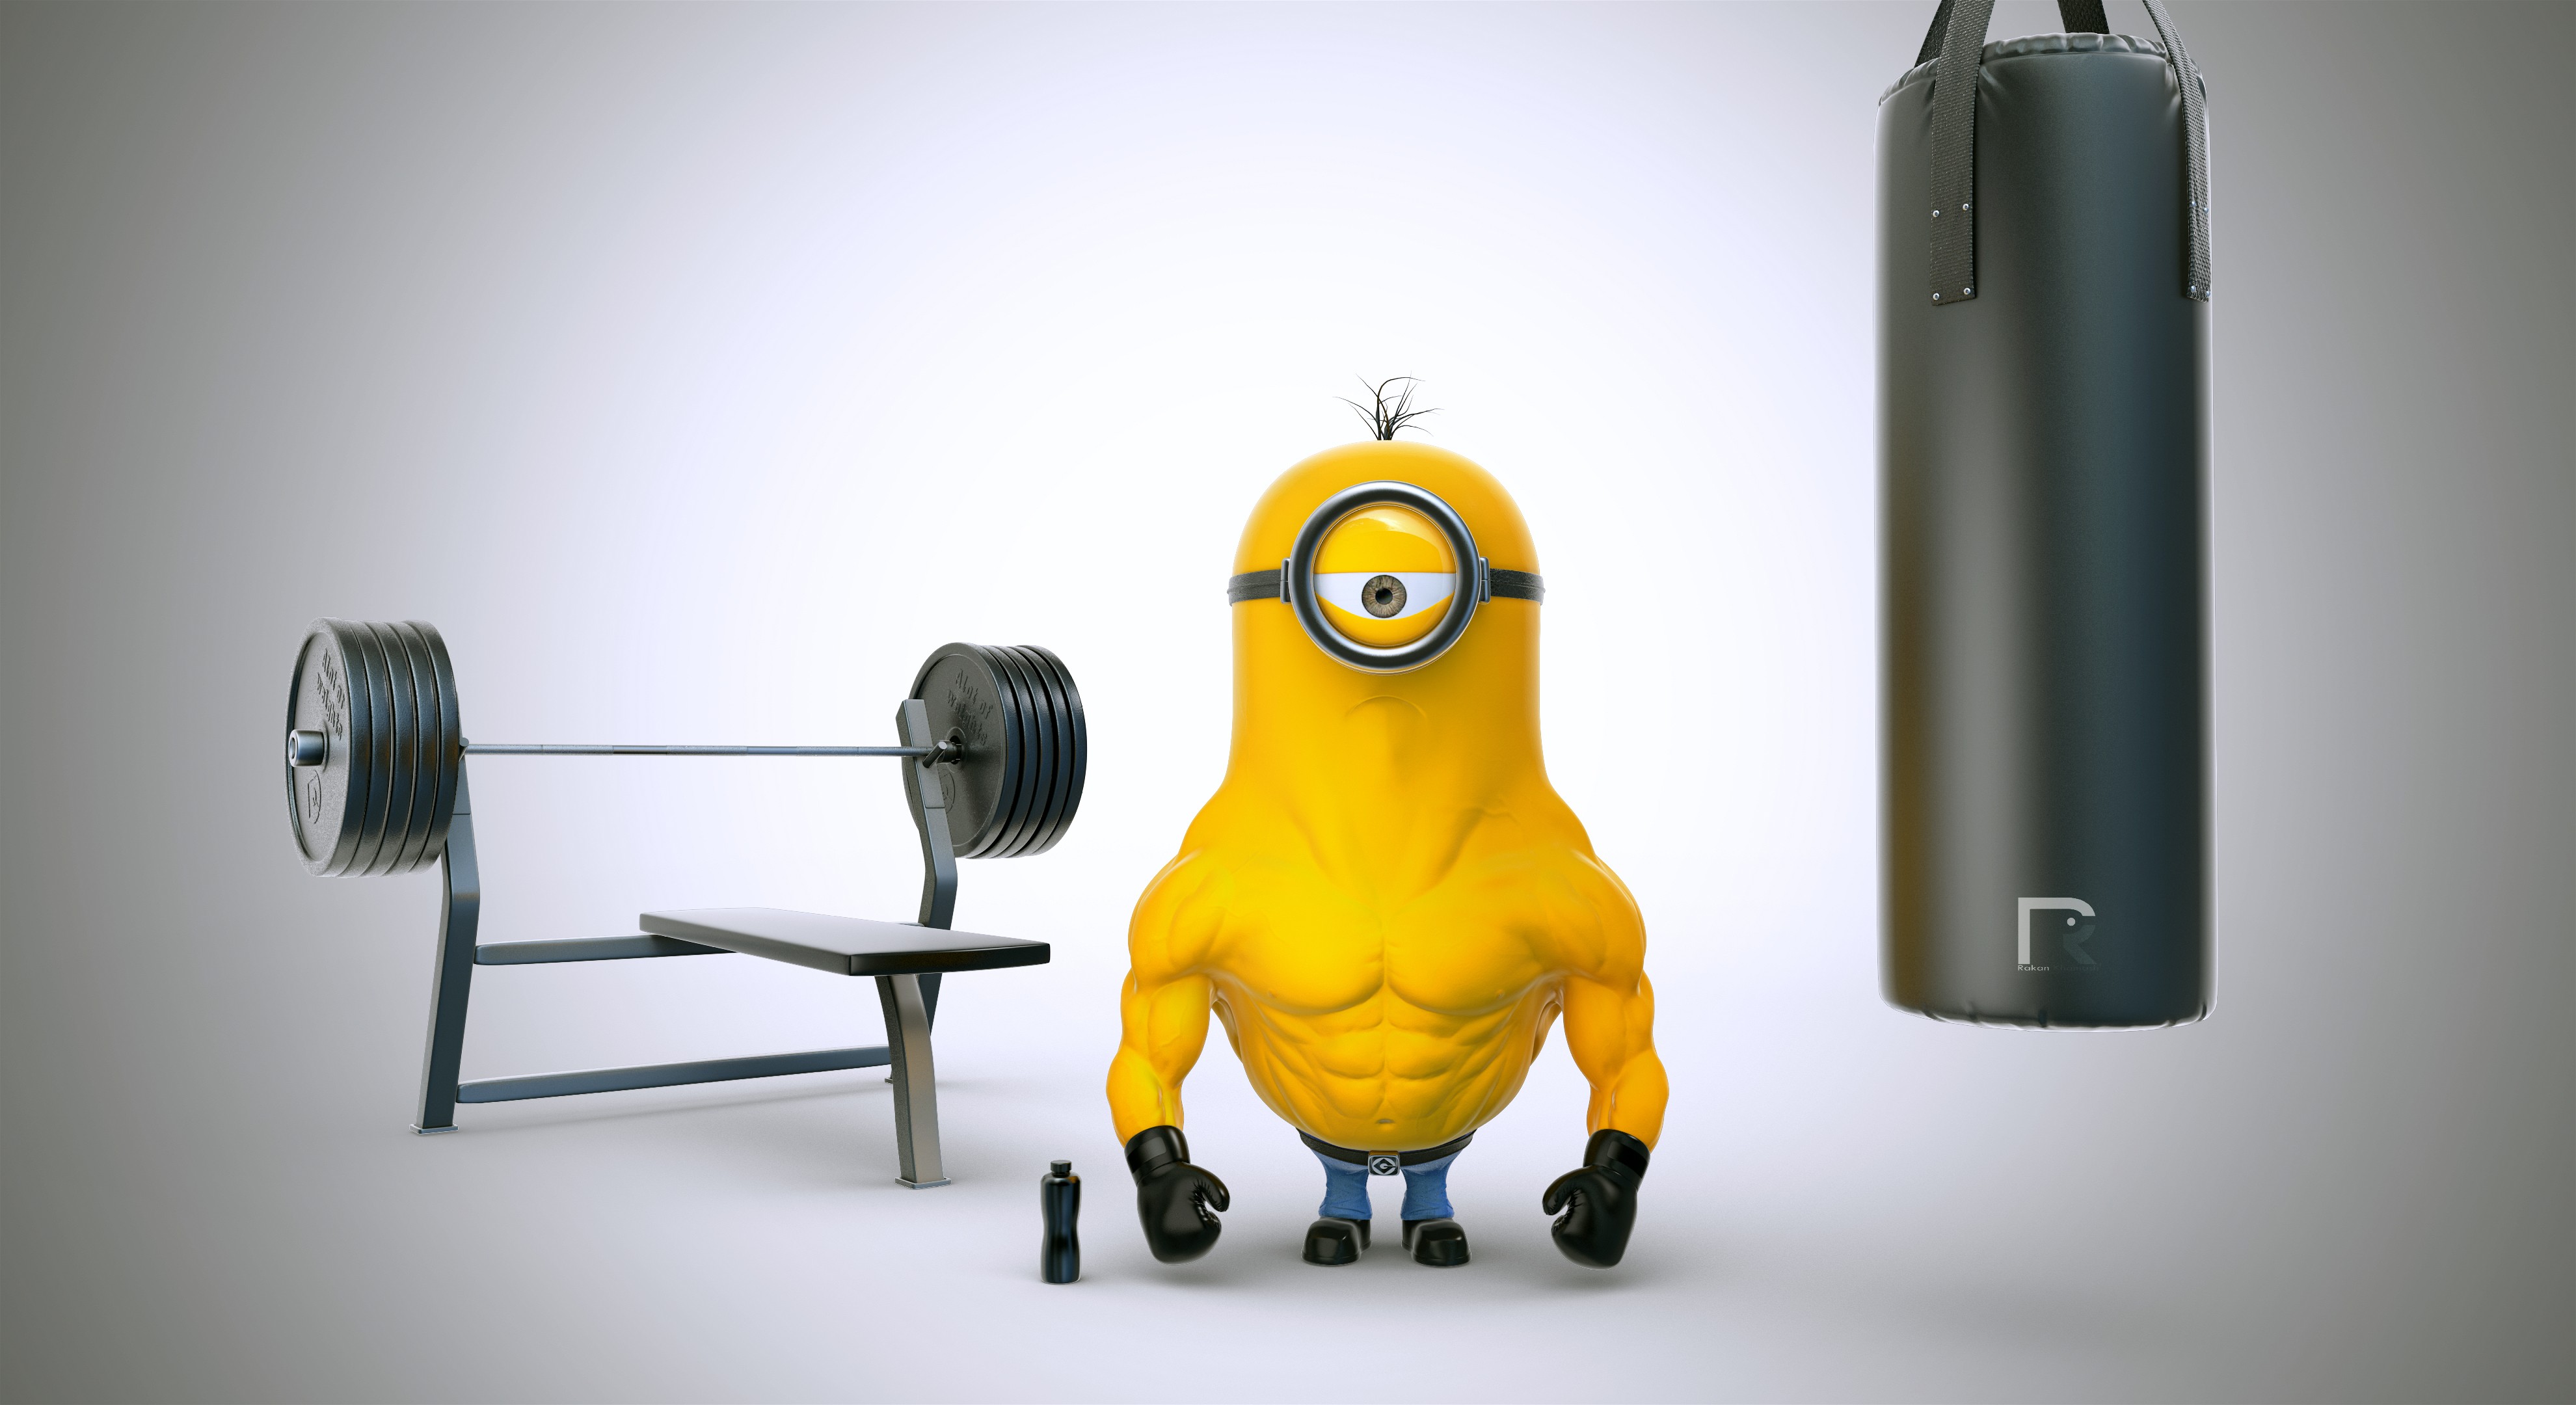 Movie Despicable Me HD Wallpaper | Background Image